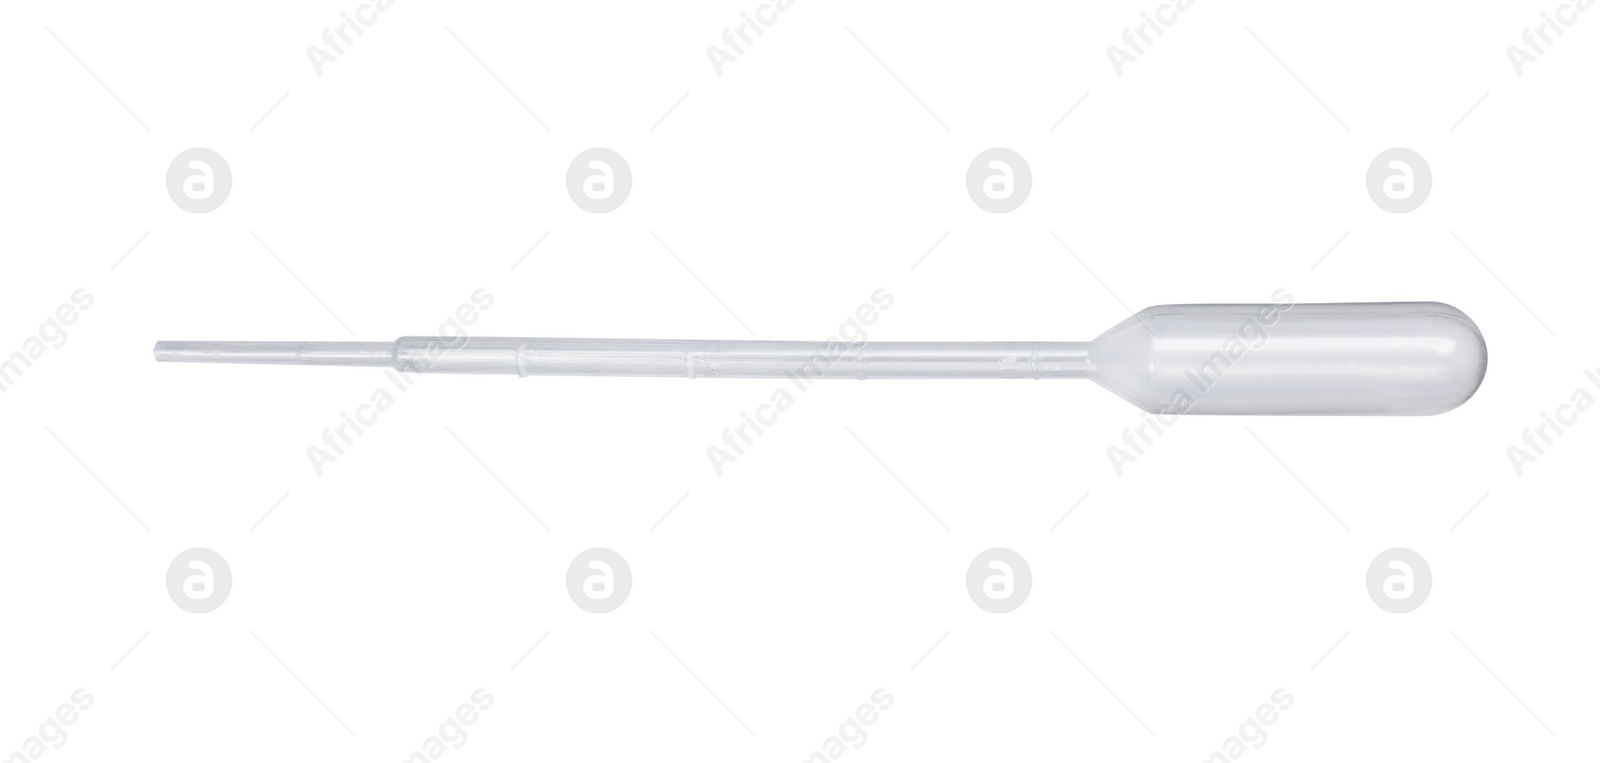 Photo of Transfer pipette on white background. Medical item